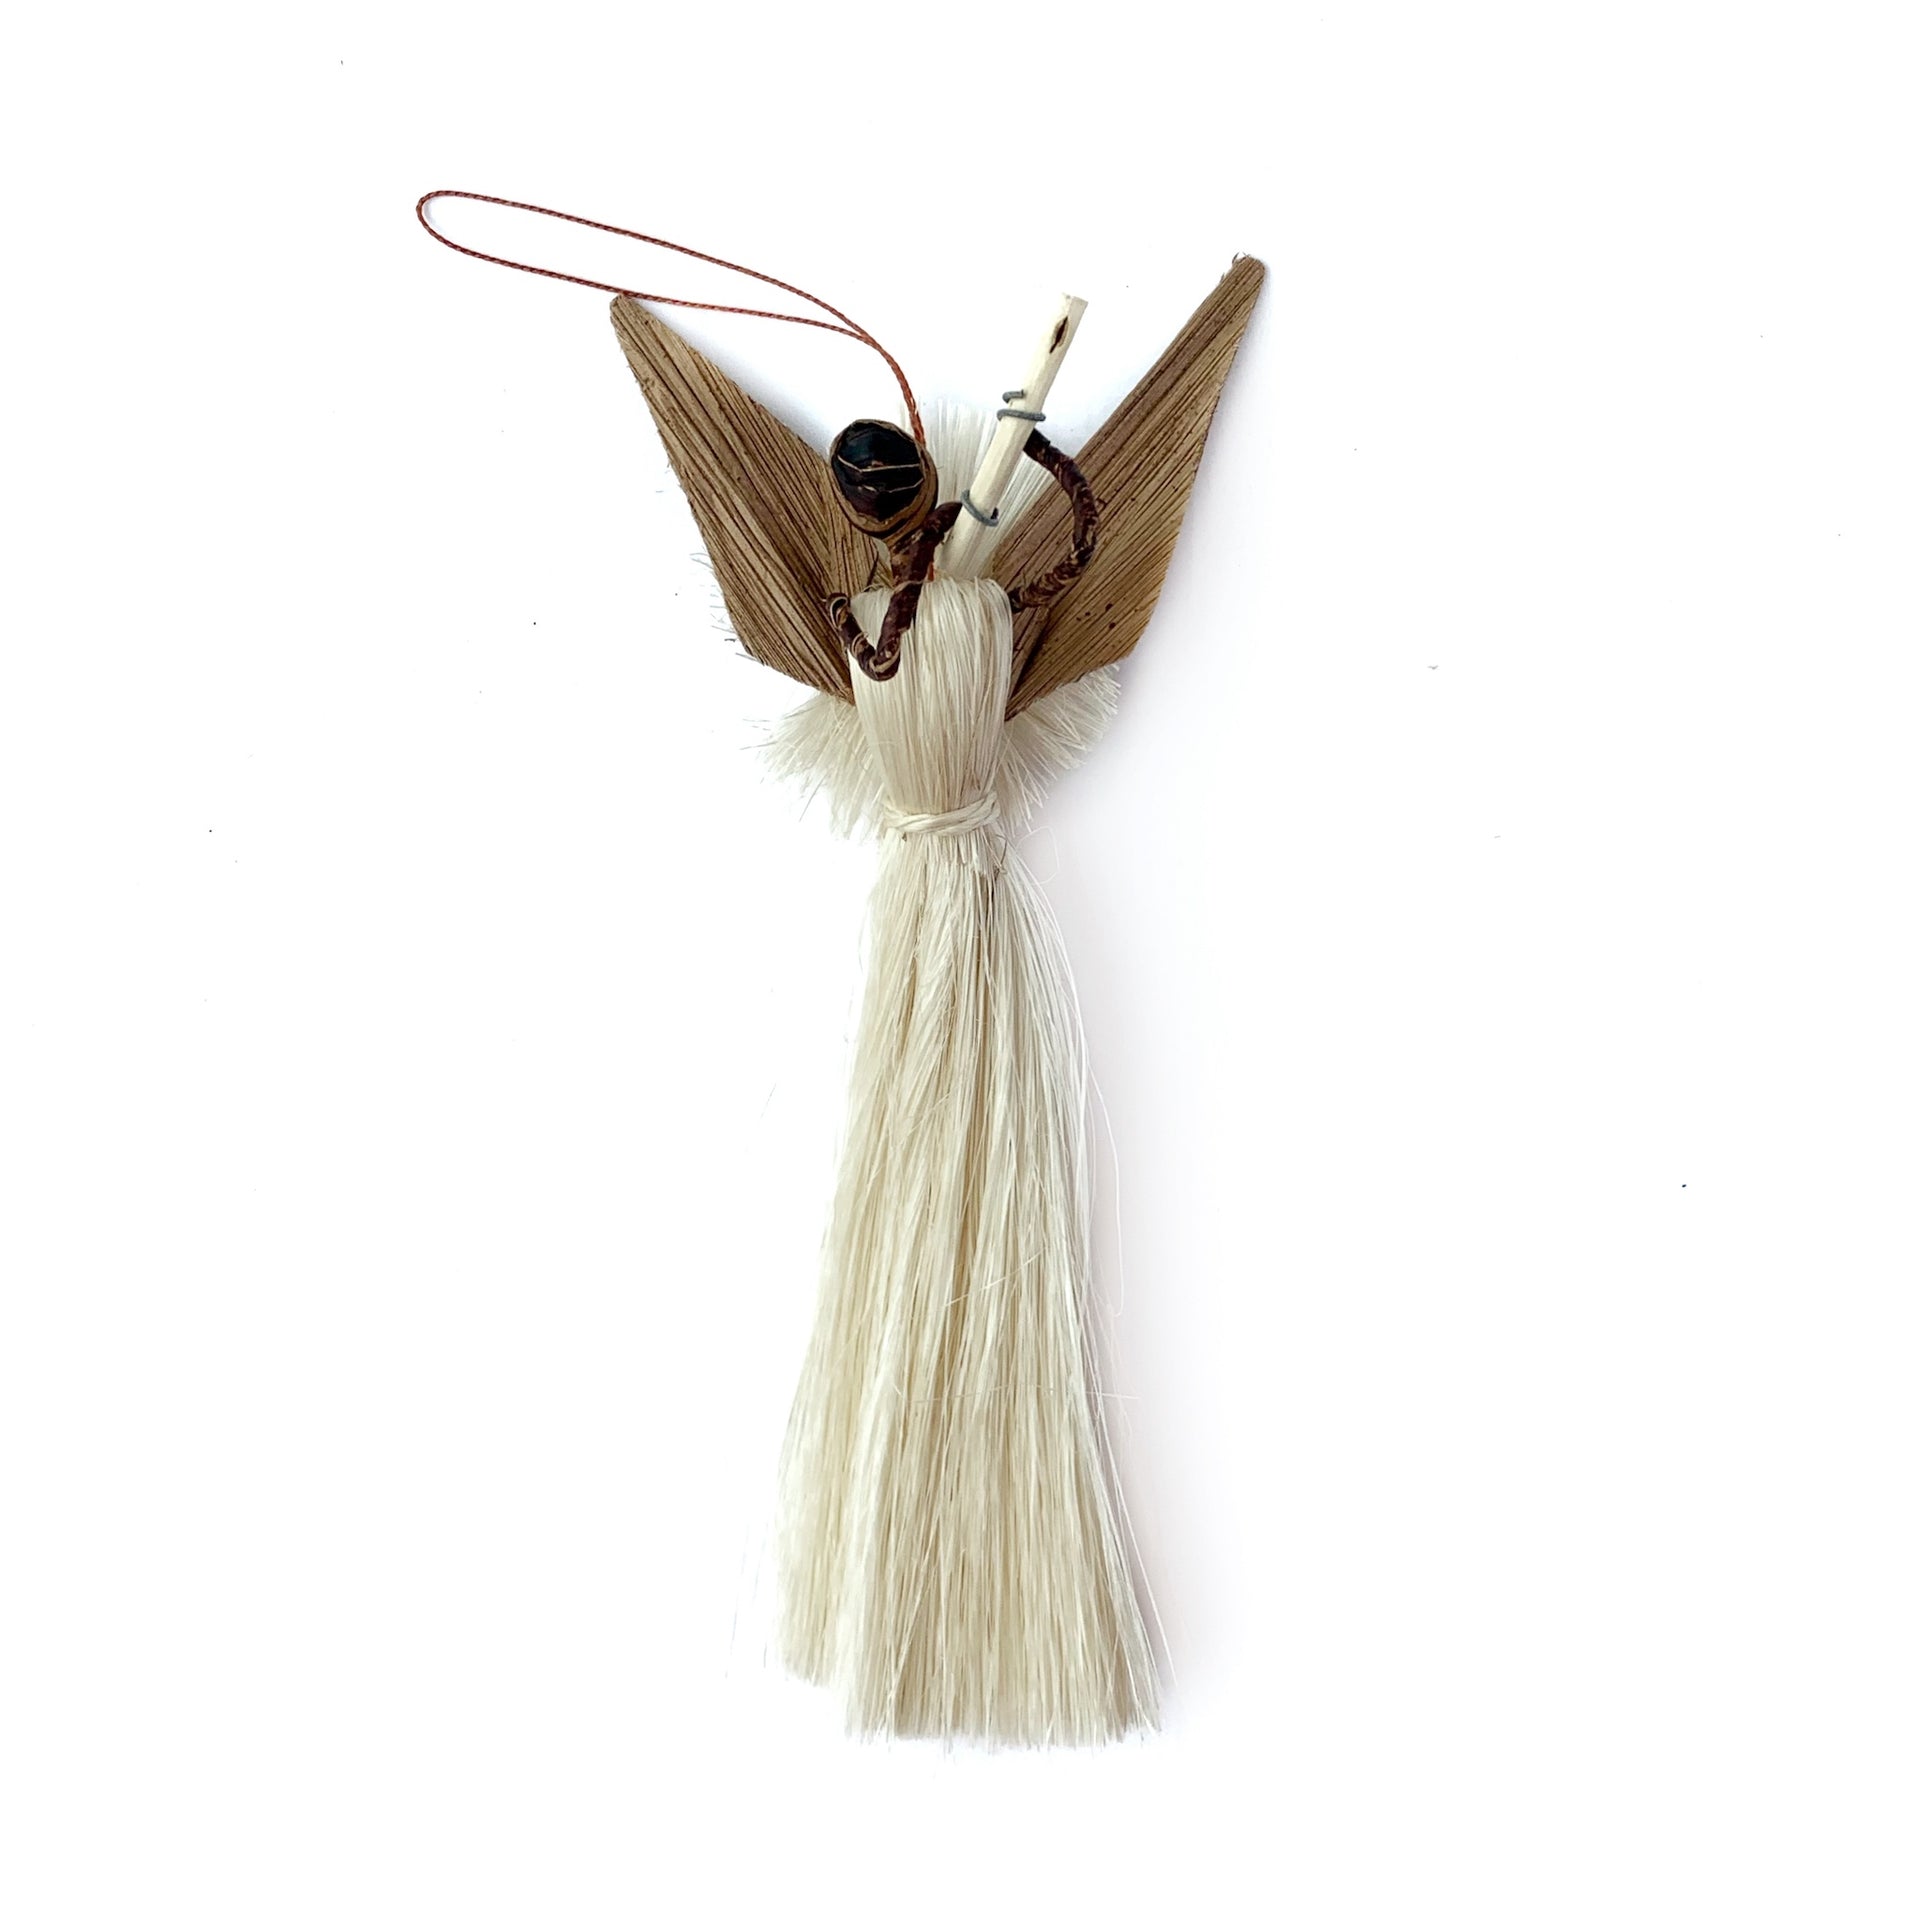 Natural banana fiber angel with flute from Ornaments 4 Orphans handmade in Kenya, Africa.